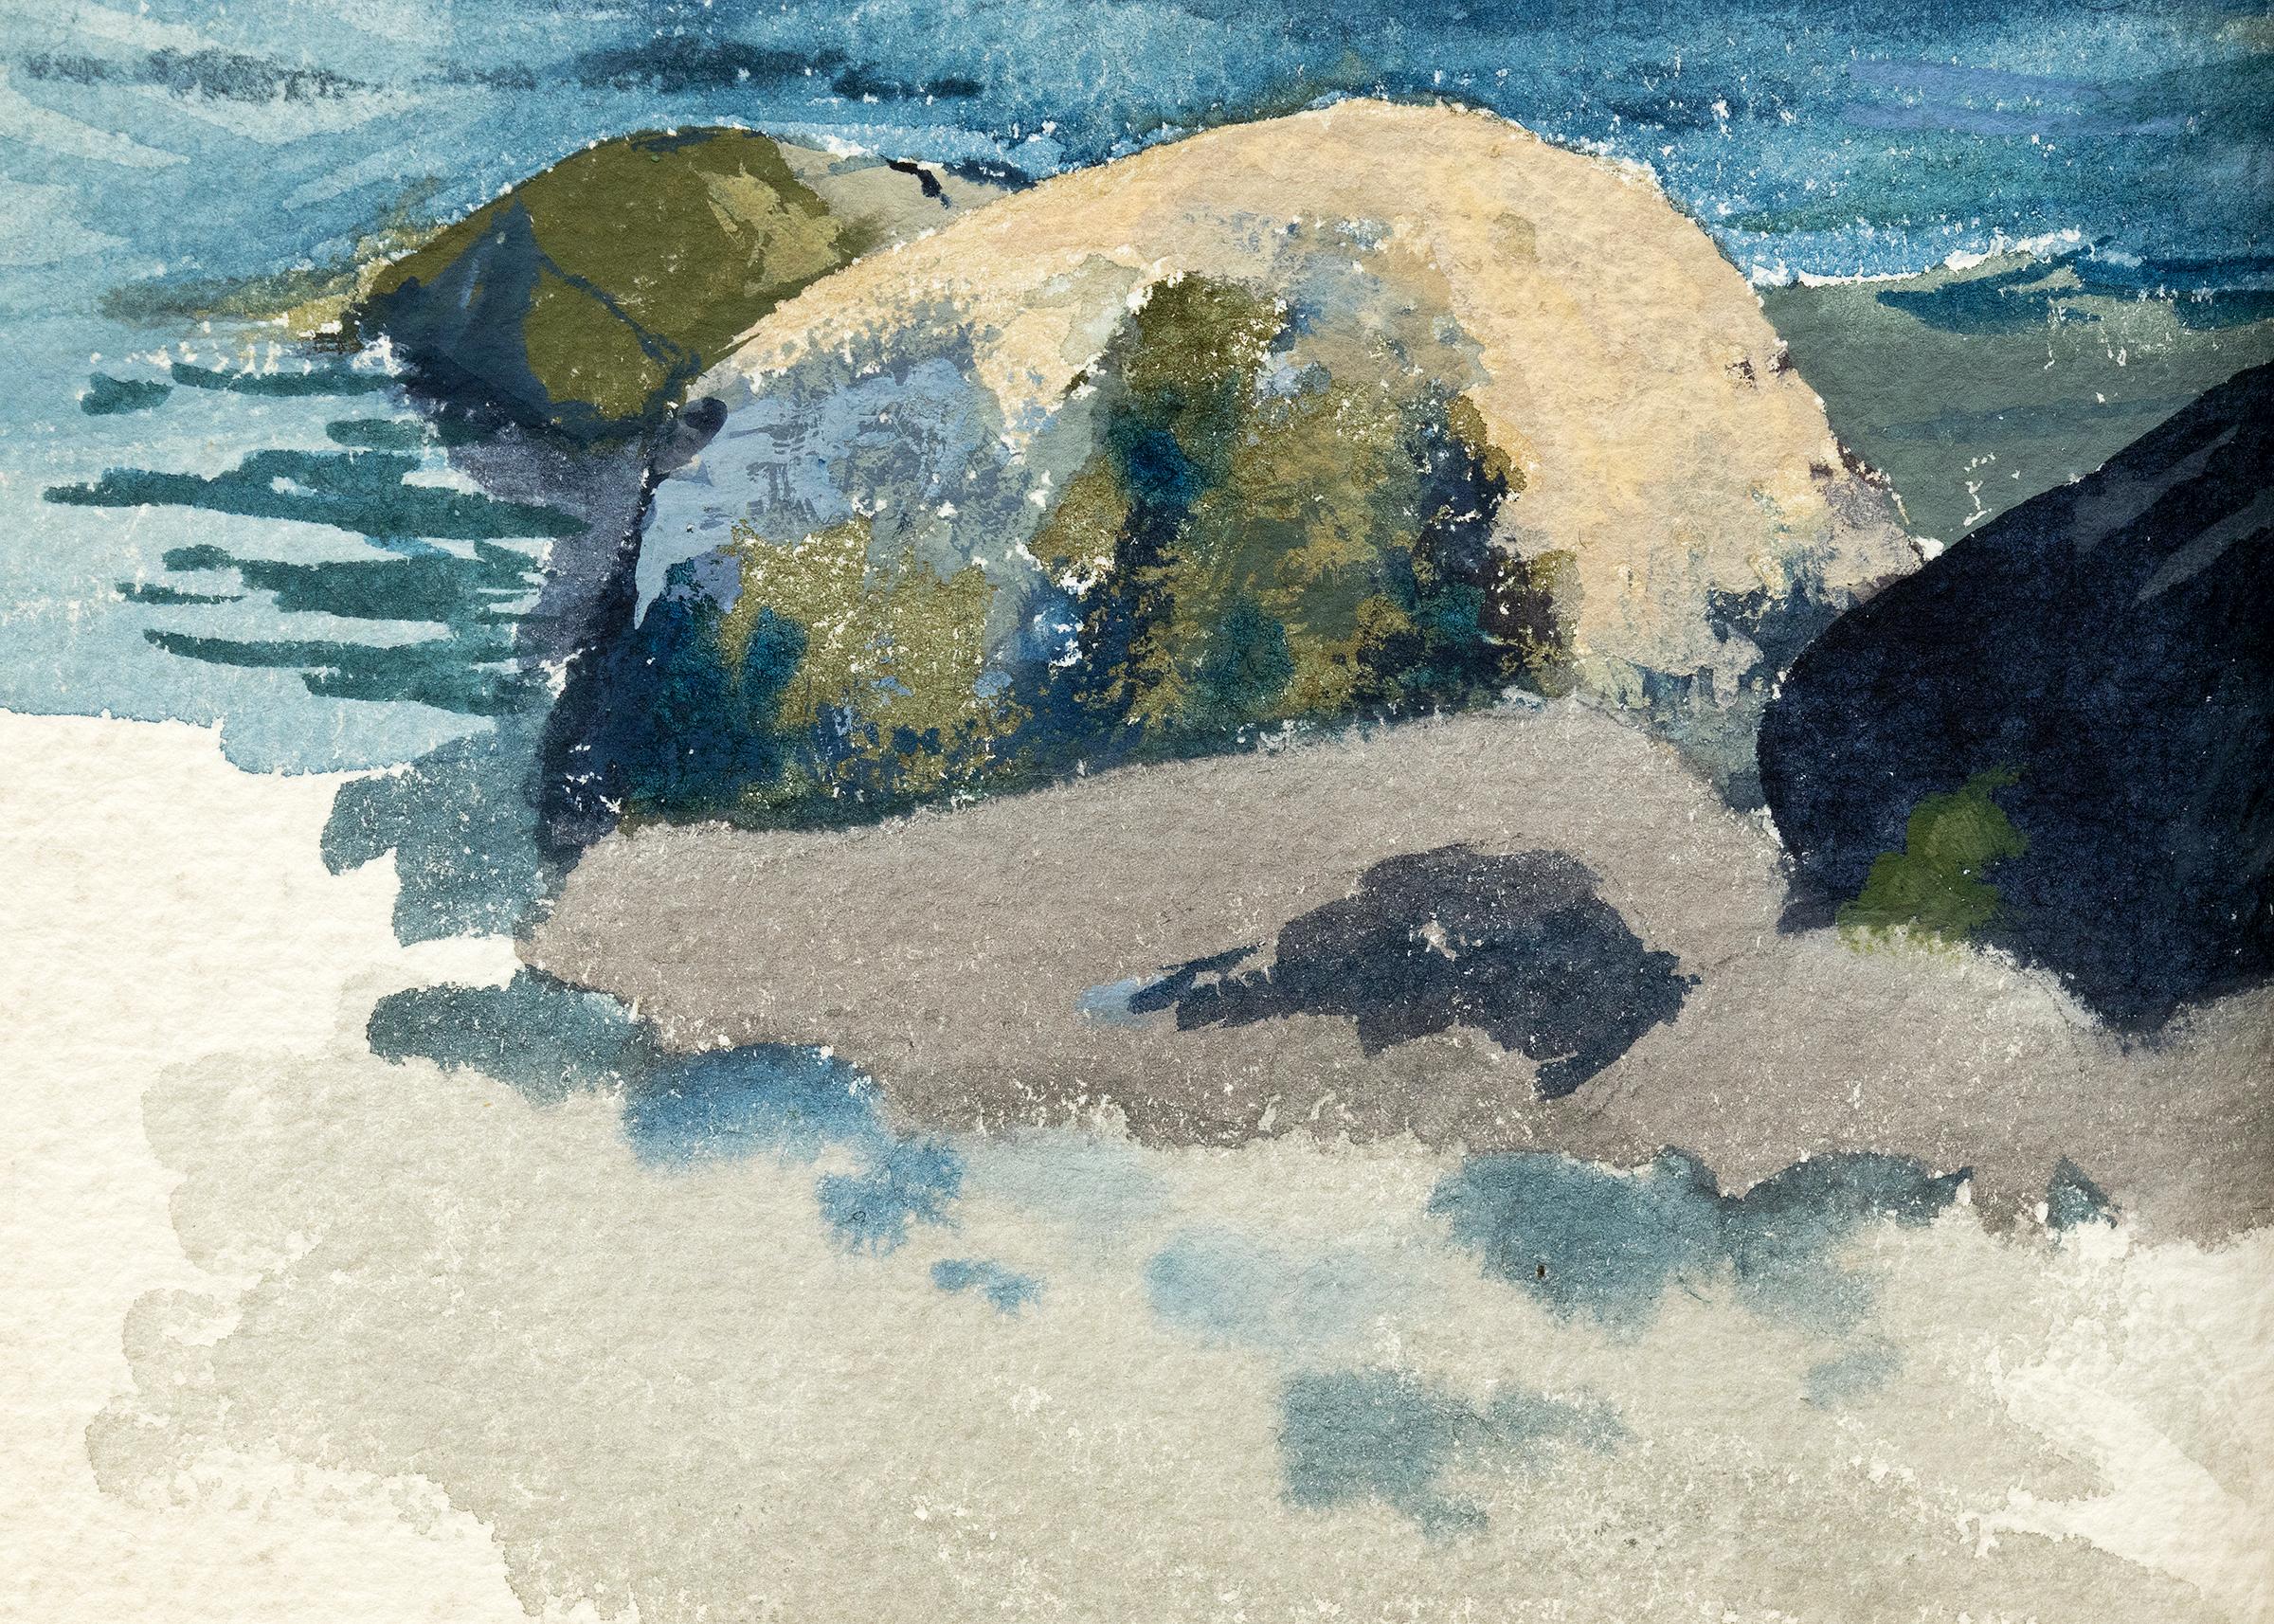 Marine Painting with waves and rocks on the California Coast, seascape by Charles Partridge Adams circa 1920. Watercolor and gouache on paper in colors of blue, gray and green, attributed to Charles Partridge Adams, copy of a letter of authenticity